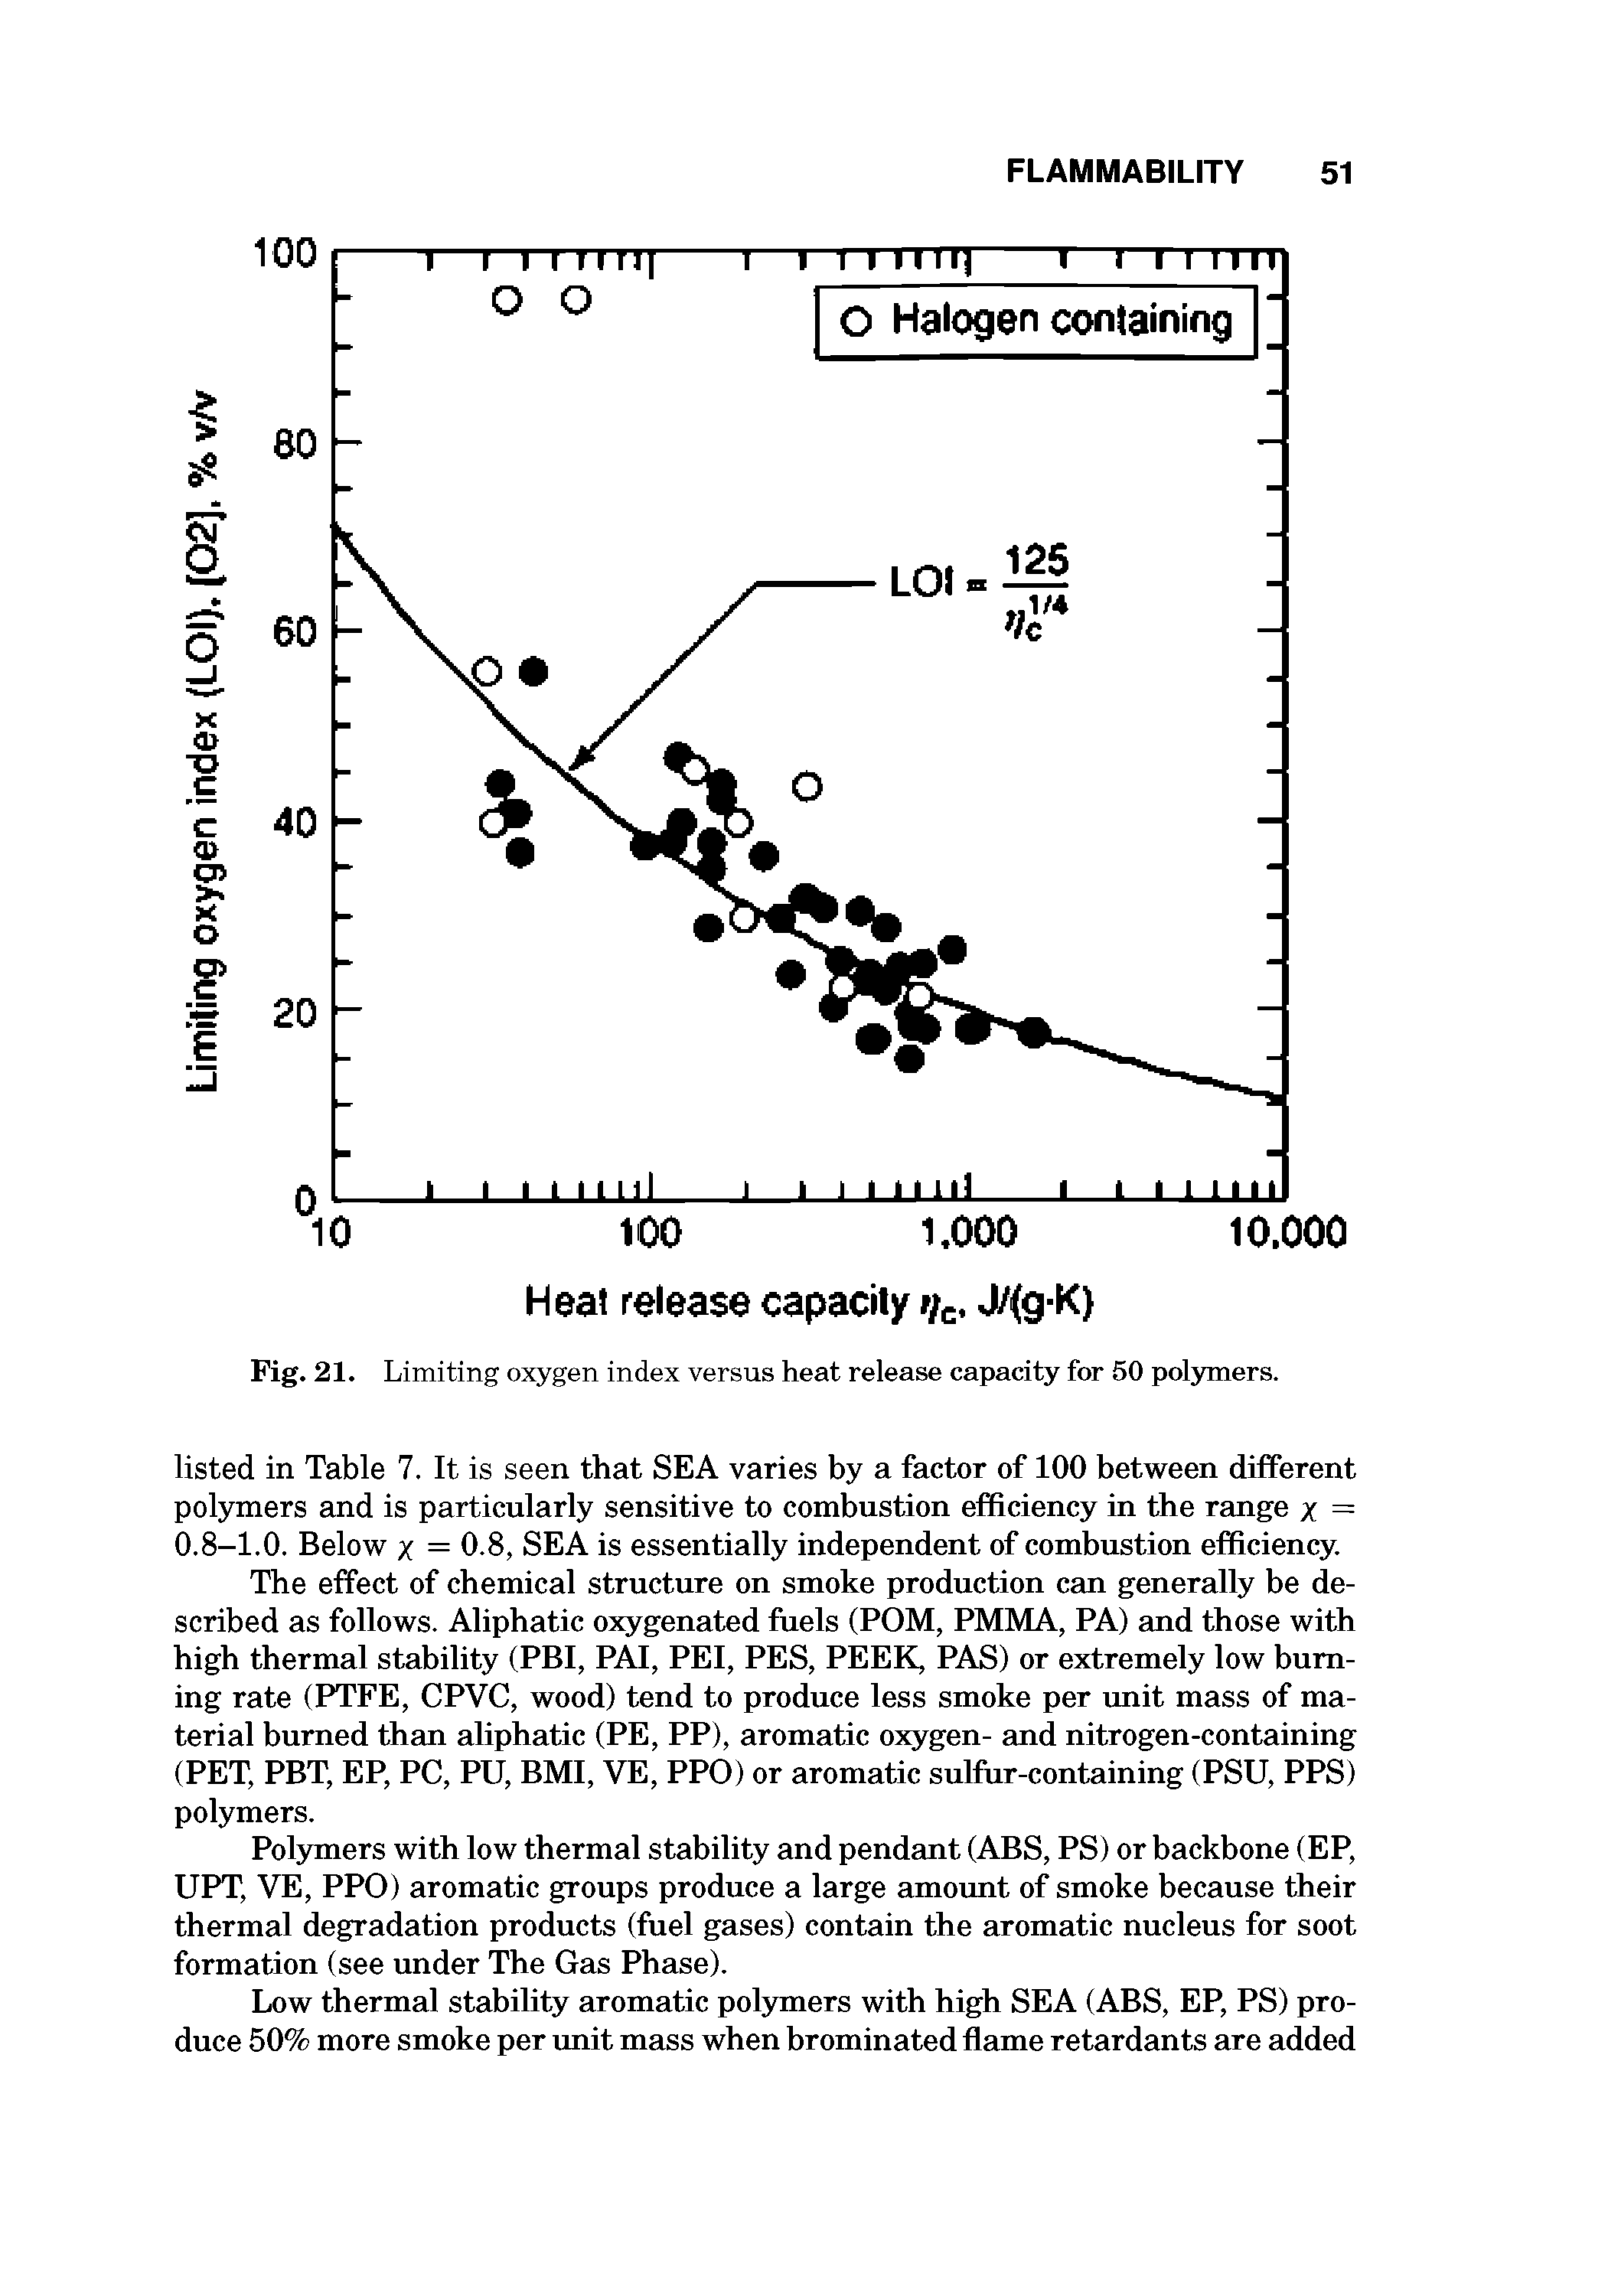 Fig. 21. Limiting oxygen index versus heat release capacity for 50 pol3rmers.